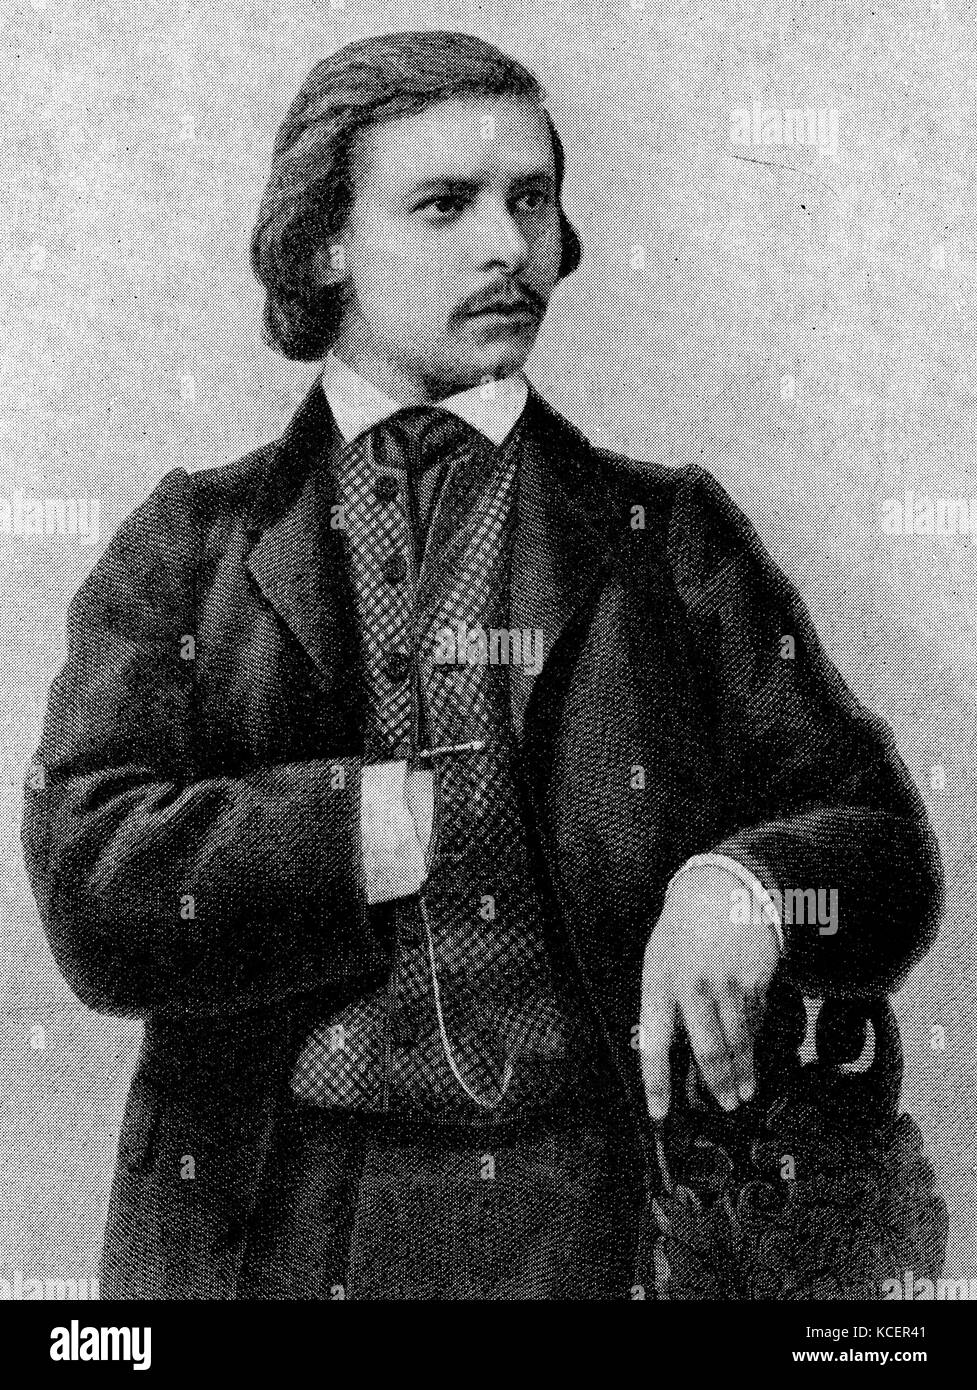 Photograph of Carl Tausig (1841-1871) a Polish virtuoso pianist, arranger and composer. Dated 19th Century Stock Photo